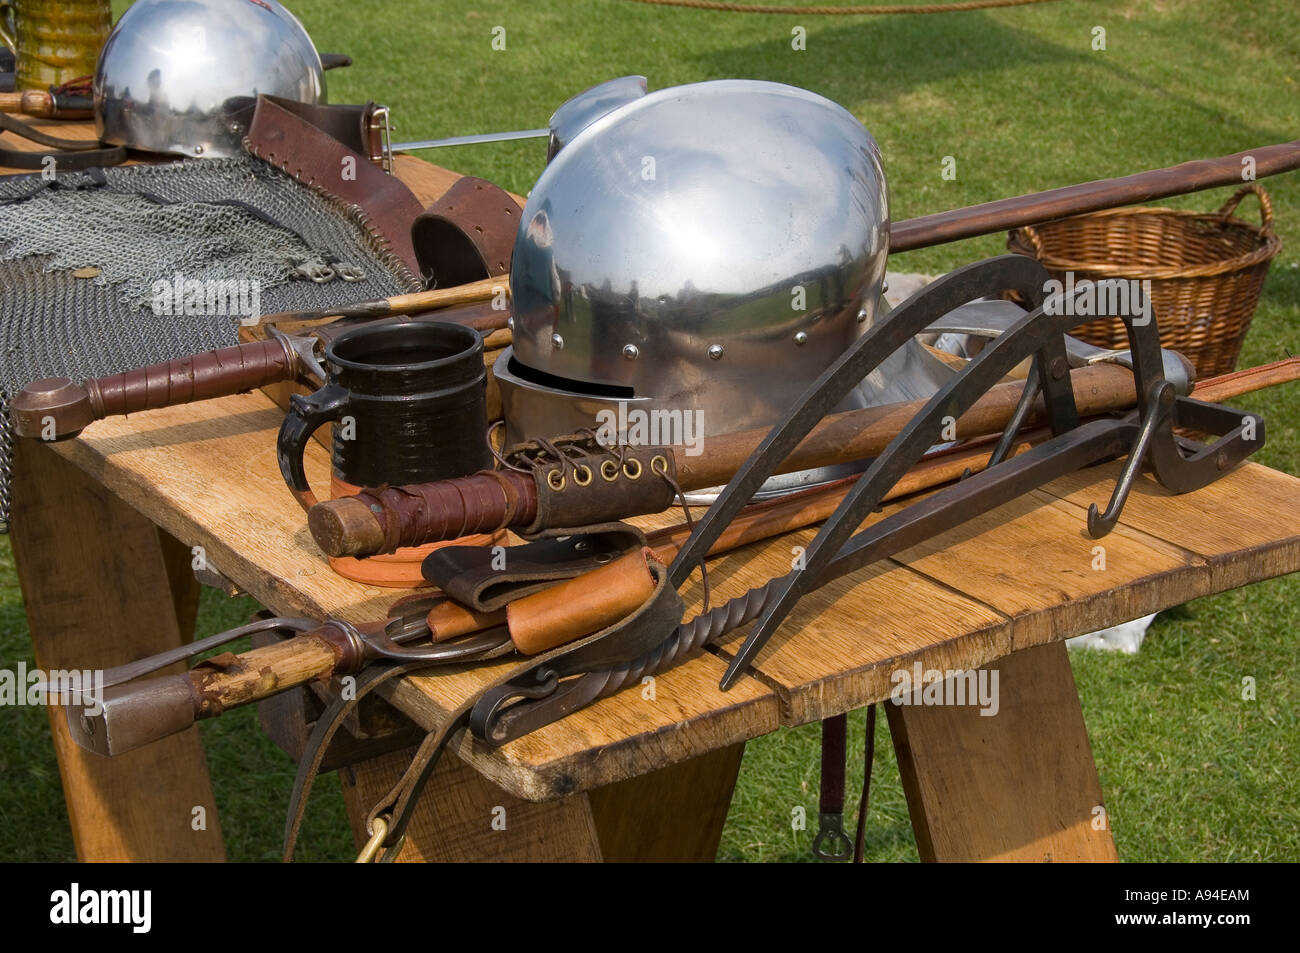 Replica helmets at St Georges Day event Scarborough Castle North Yorkshire England UK United Kingdom GB Great Britain Stock Photo